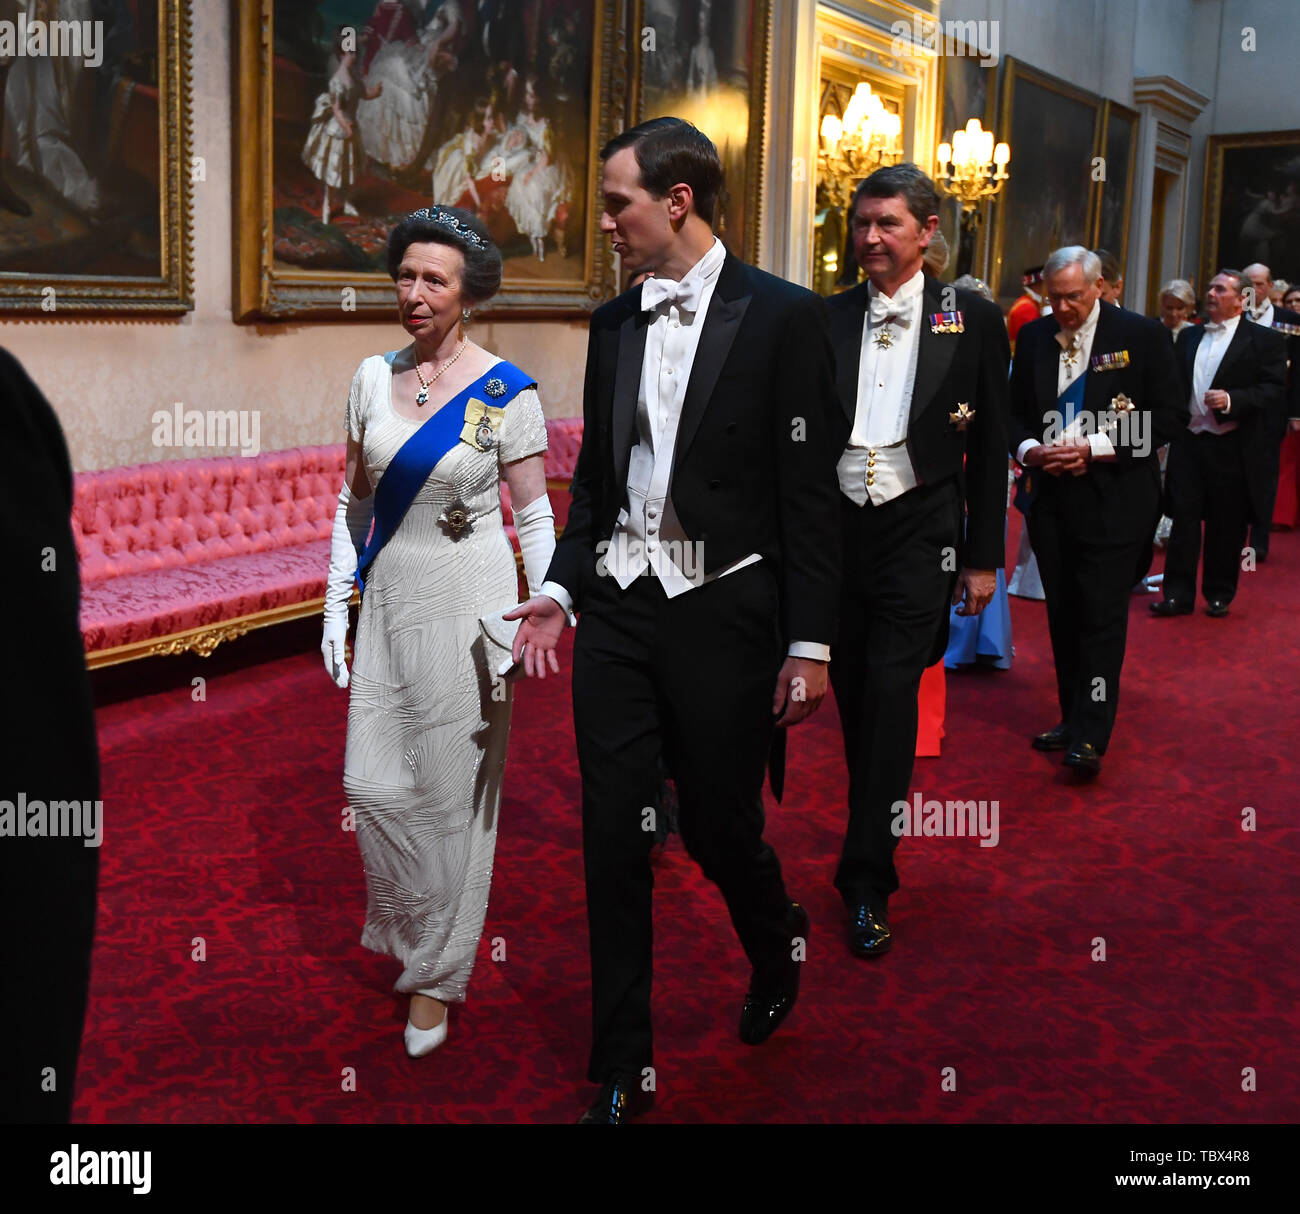 The Princess Royal and Jared Kushner arrive through the East Gallery during the State Banquet at Buckingham Palace, London, on day one of the US President's three day state visit to the UK. Stock Photo